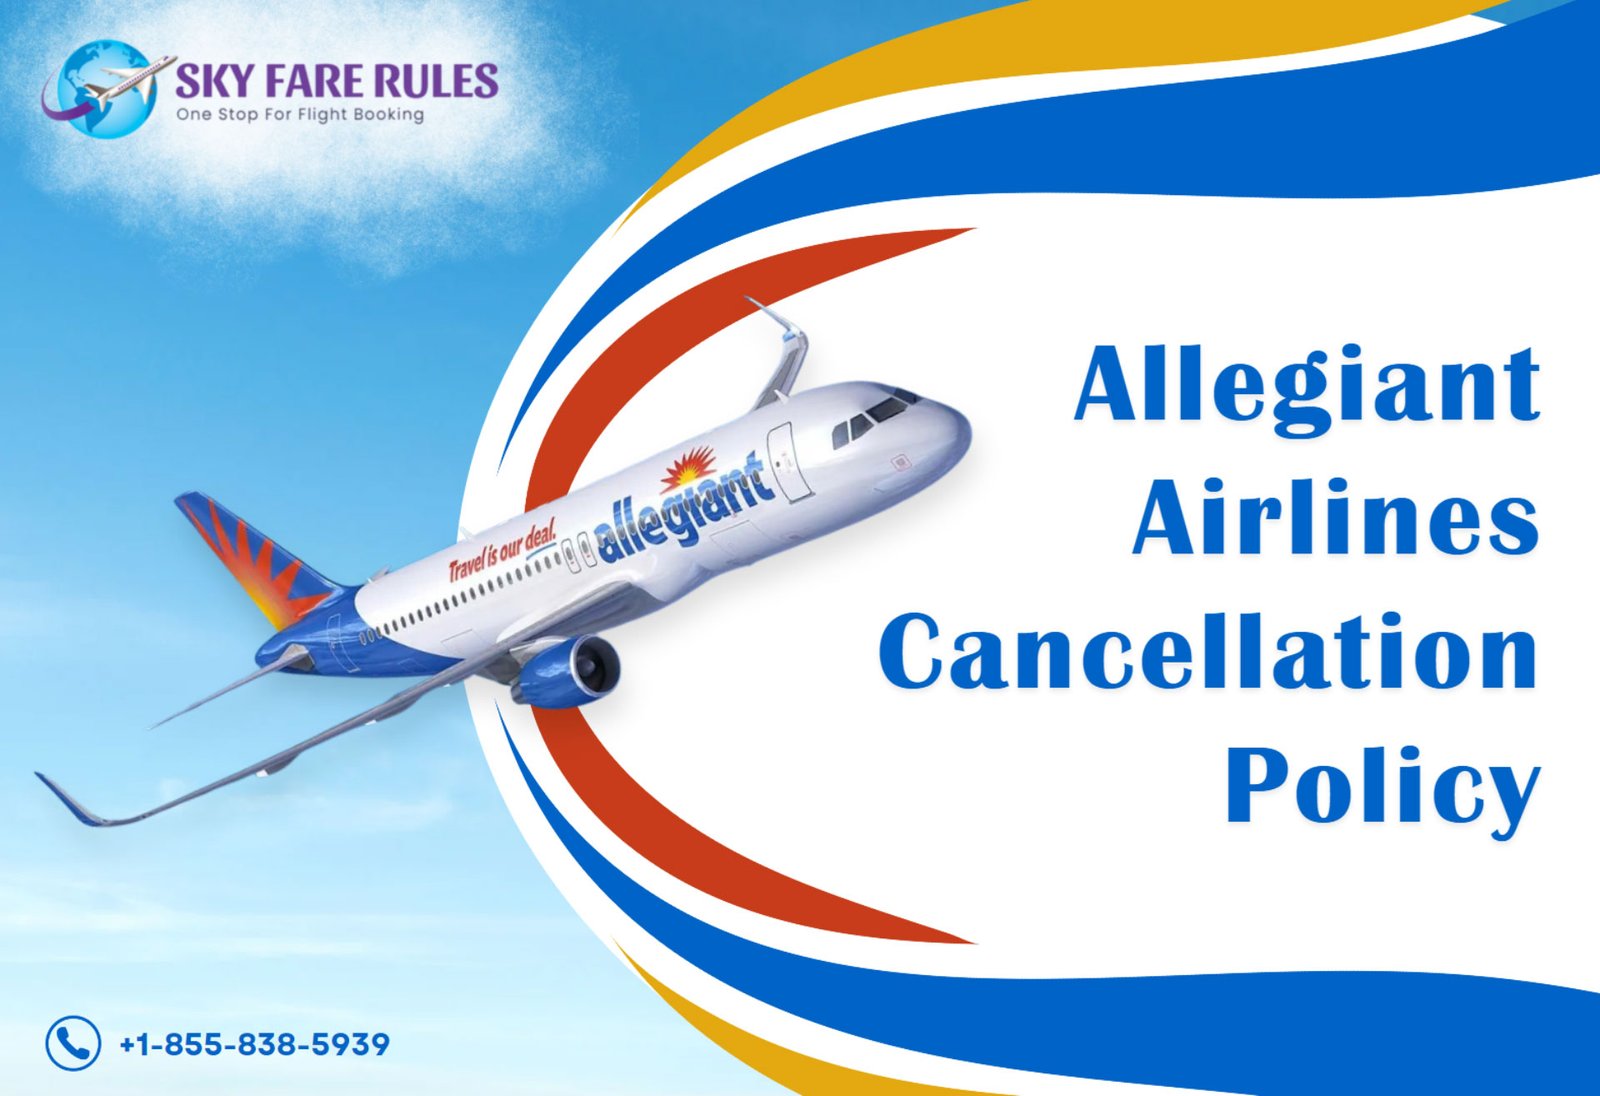 Allegiant Airlines Cancellation Policy - Sky Fare Rules